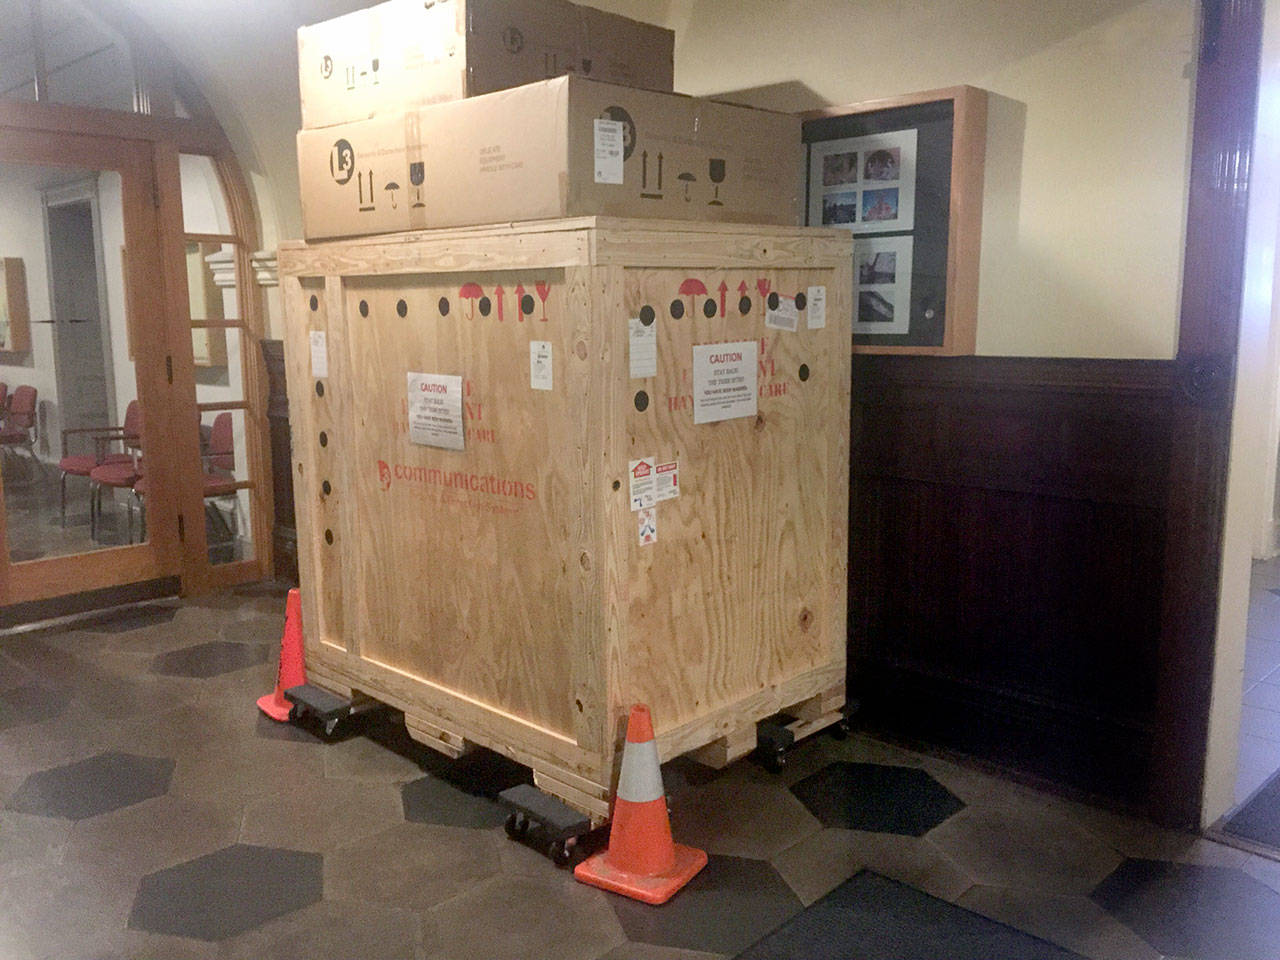 Boxes in the basement of the Jefferson County Courthouse in Port Townsend hold metal detectors and other security equipment that will be implemented on the second floor. (Cydney McFarland/Peninsula Daily News)